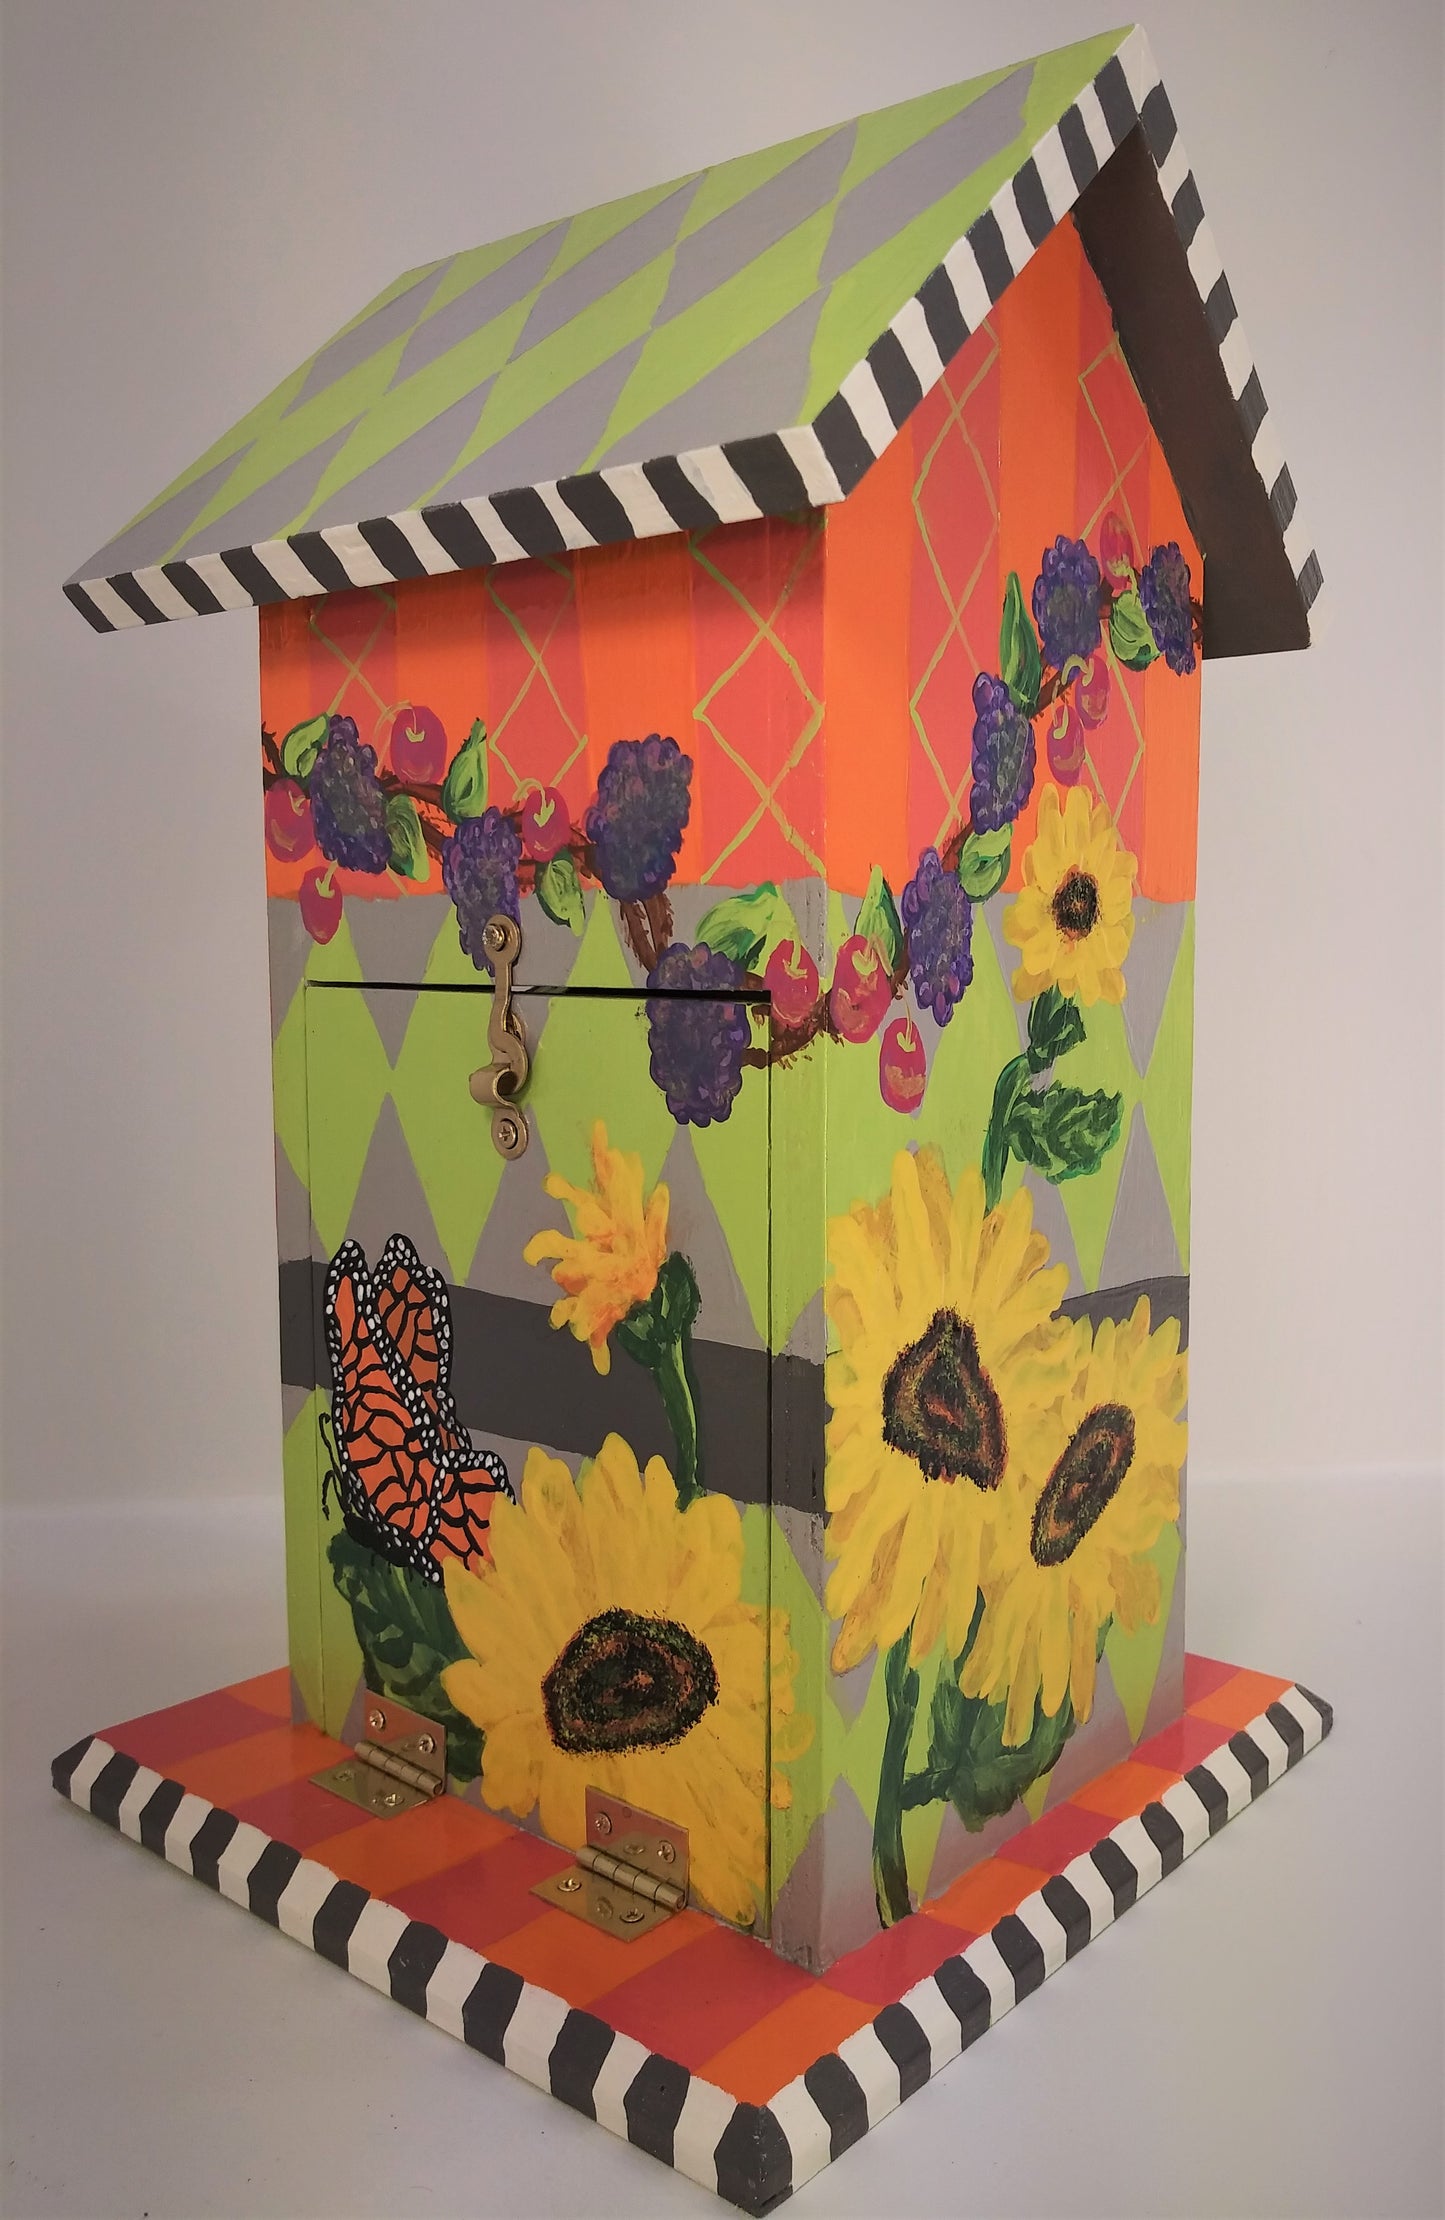 Birdhouse with Sunflowers, Blackberries and Butterflies